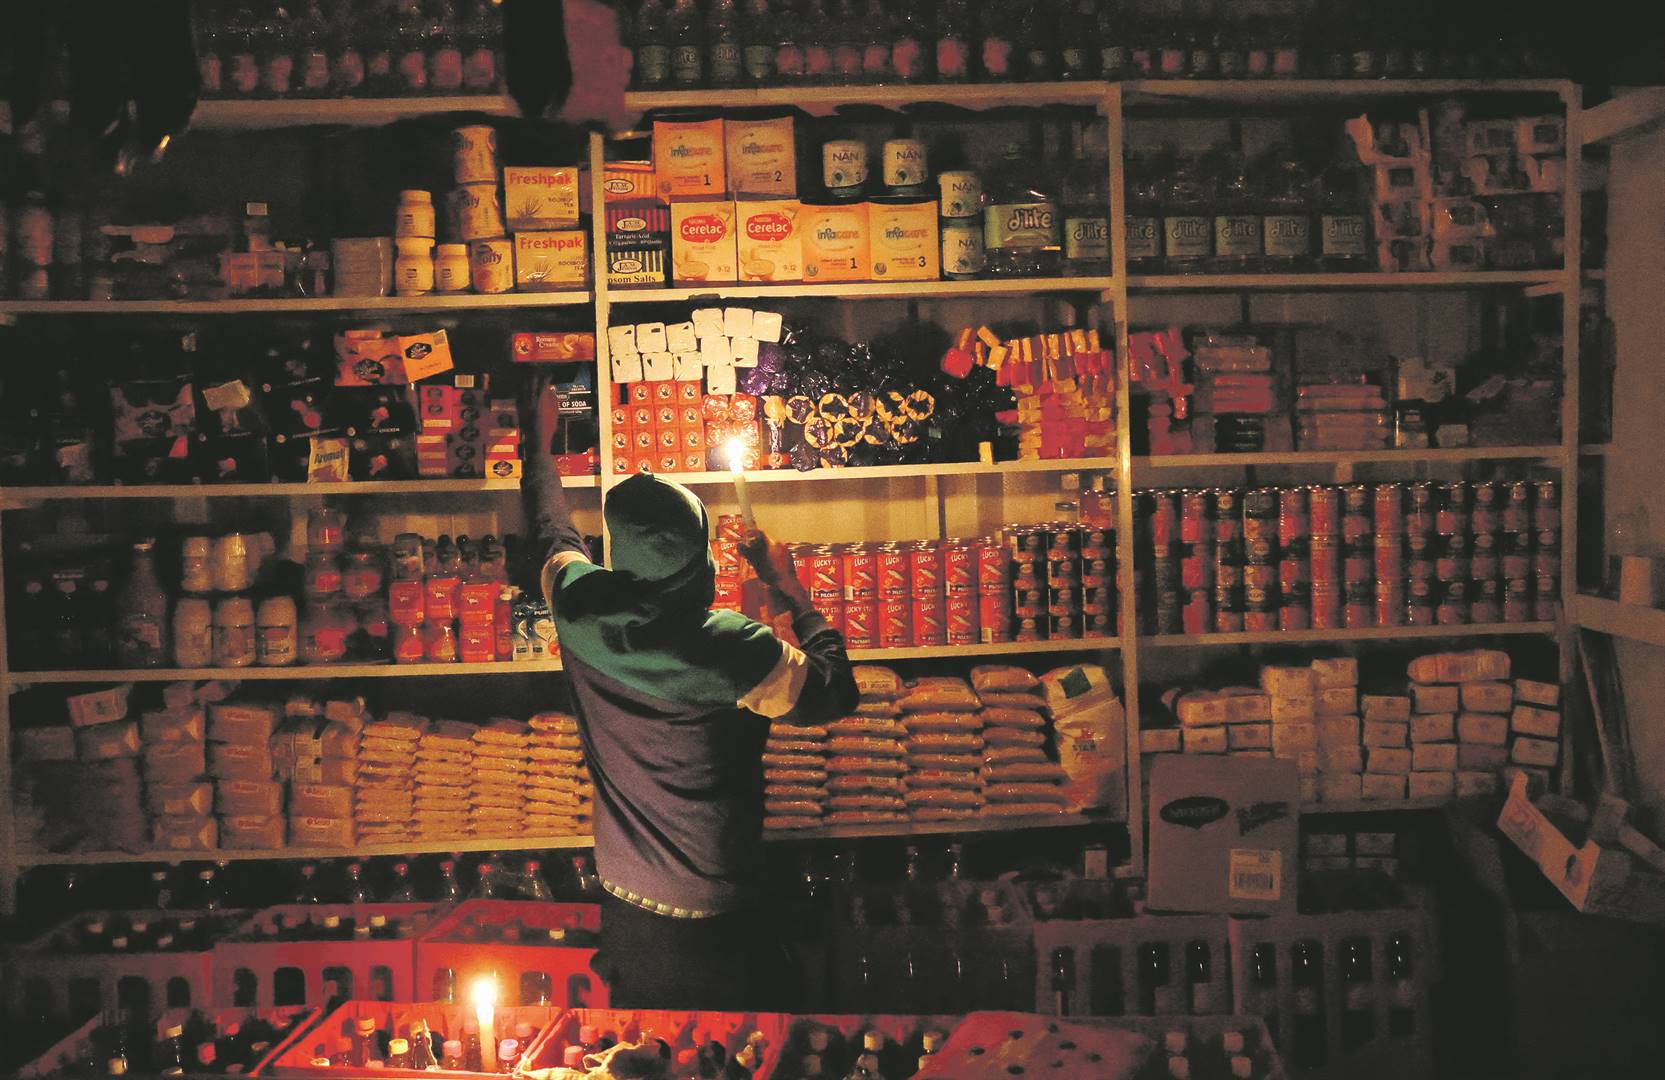 energy crisisA shop owner picks an item off the shelf for a customer by candlelight, during one of the country’s many power outages. Eskom has been battling to keep the lights on for several years due to more breakdowns at its ageing coal-fired plants. The introduction of clean energy could alleviate the power shortages, while easing the climate crisis. Photo: siphiwe sibeko / reuters